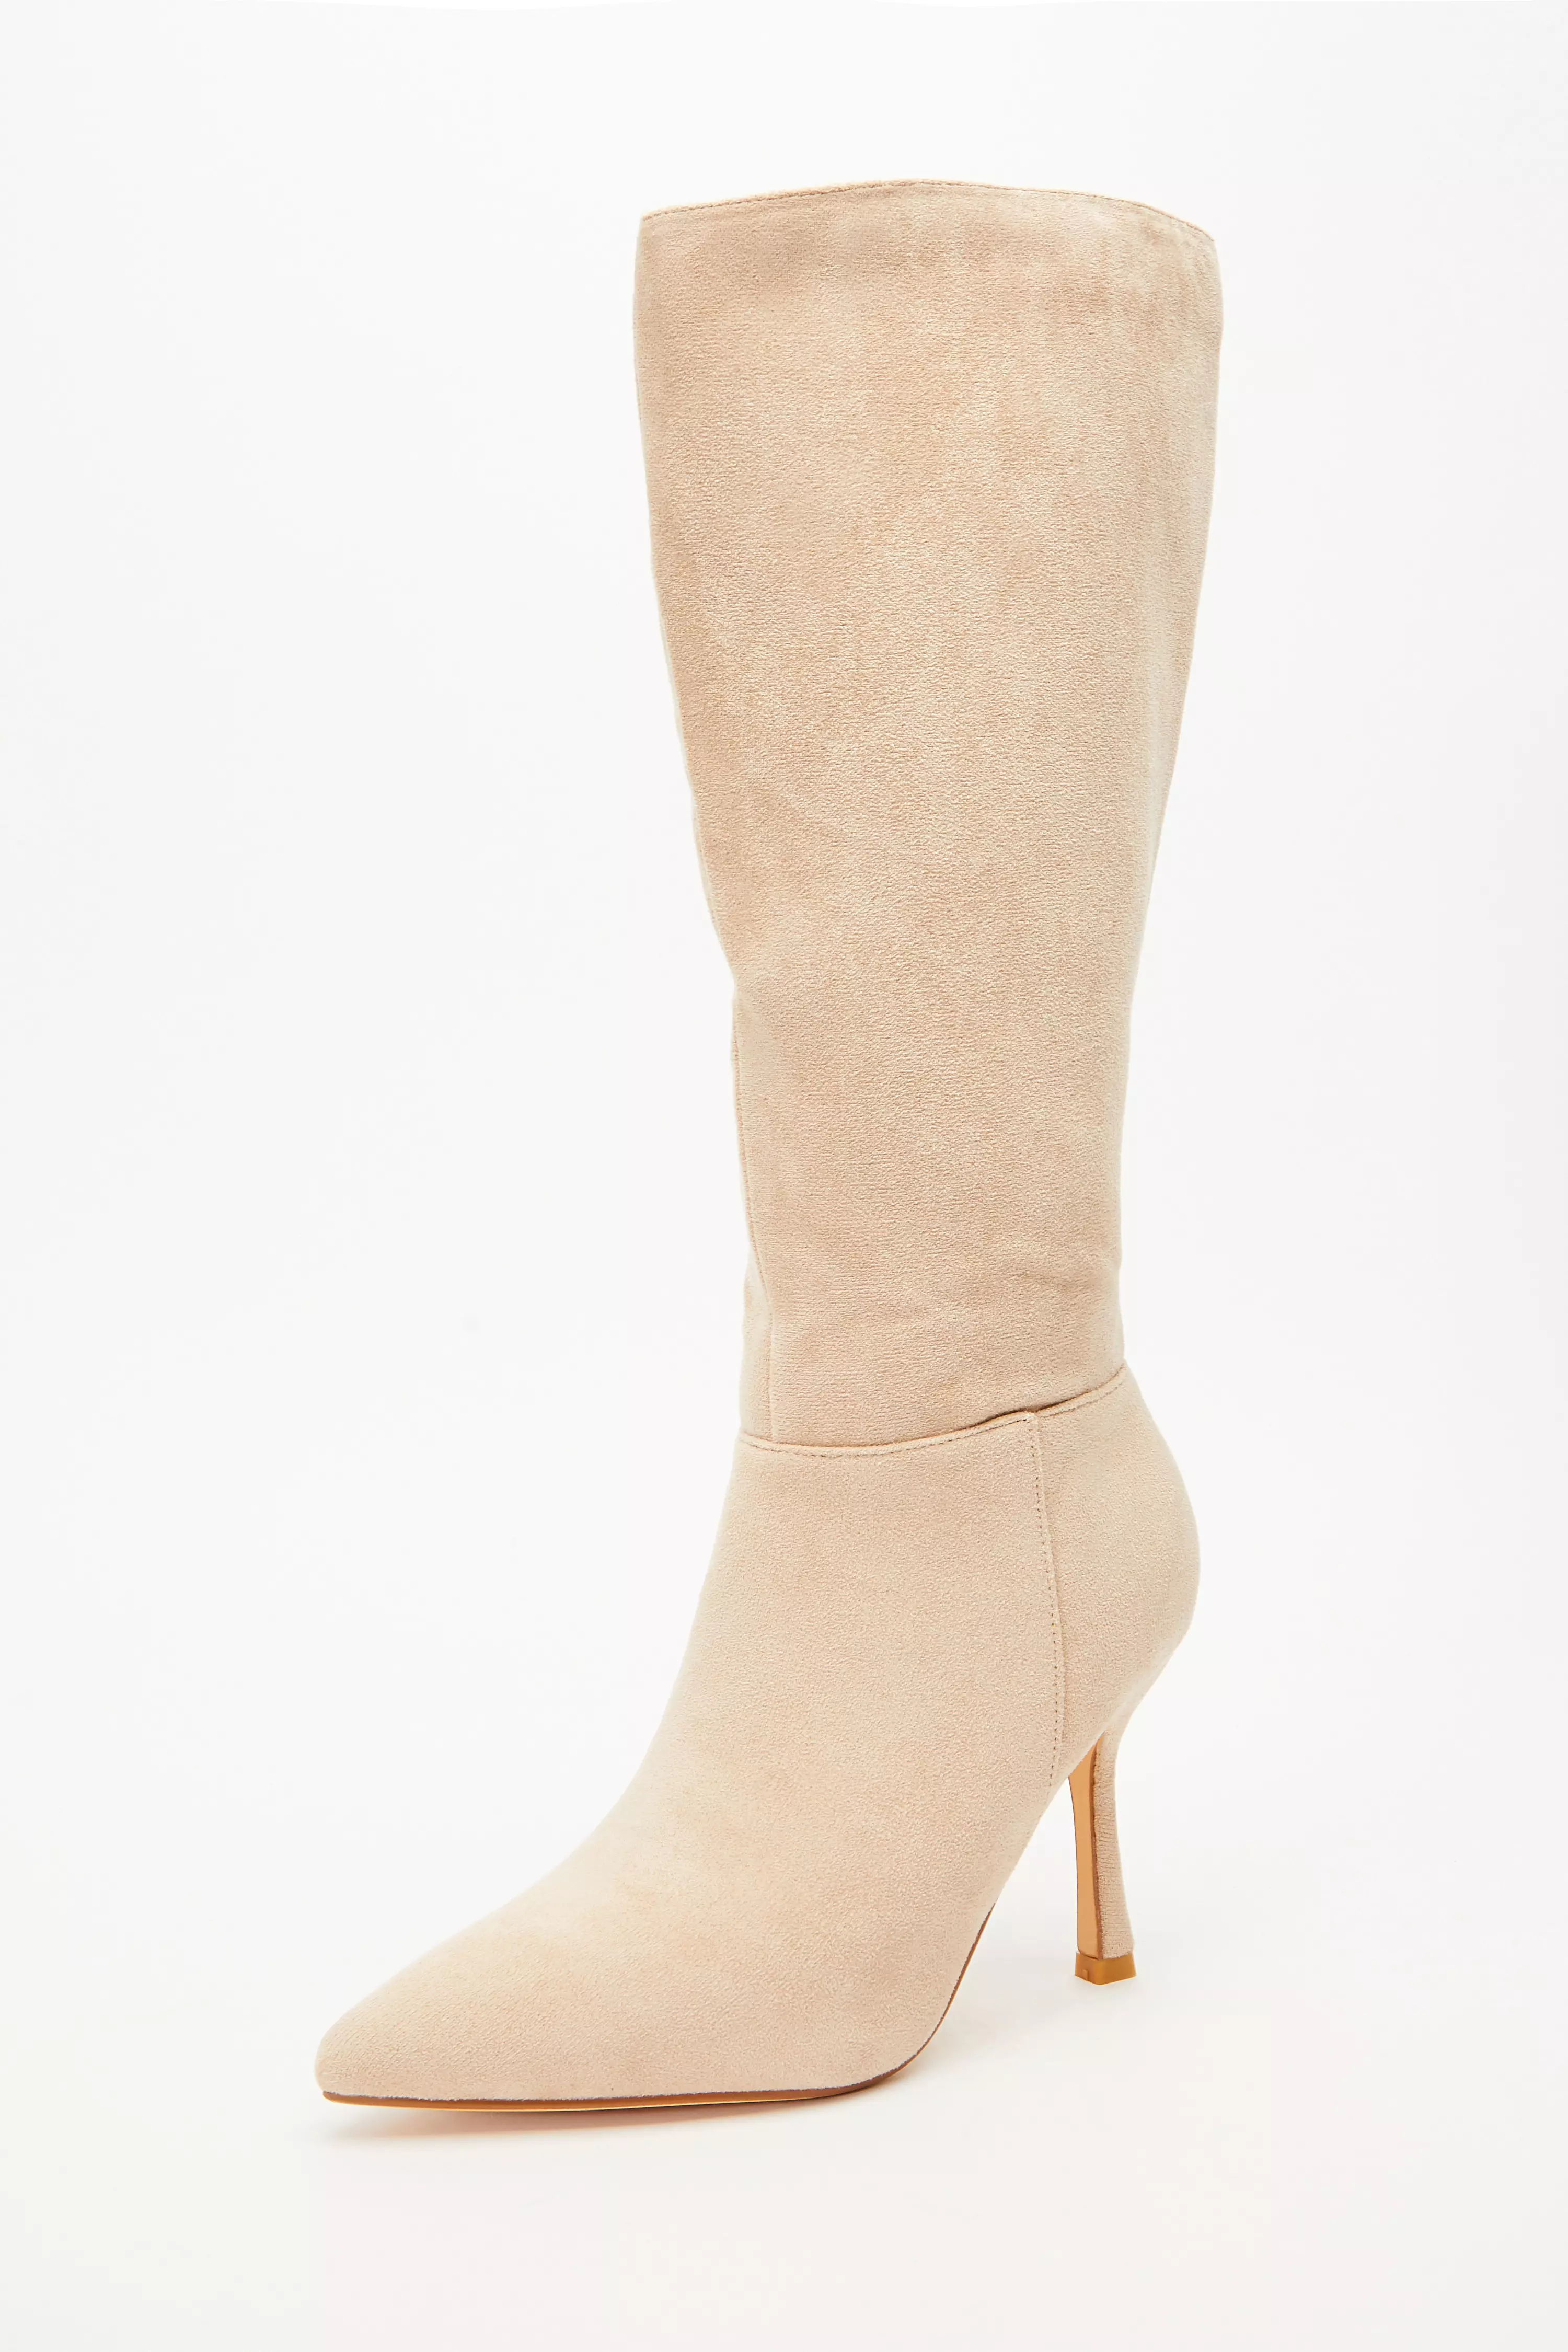 Cream Faux Suede Knee High Heeled Boots